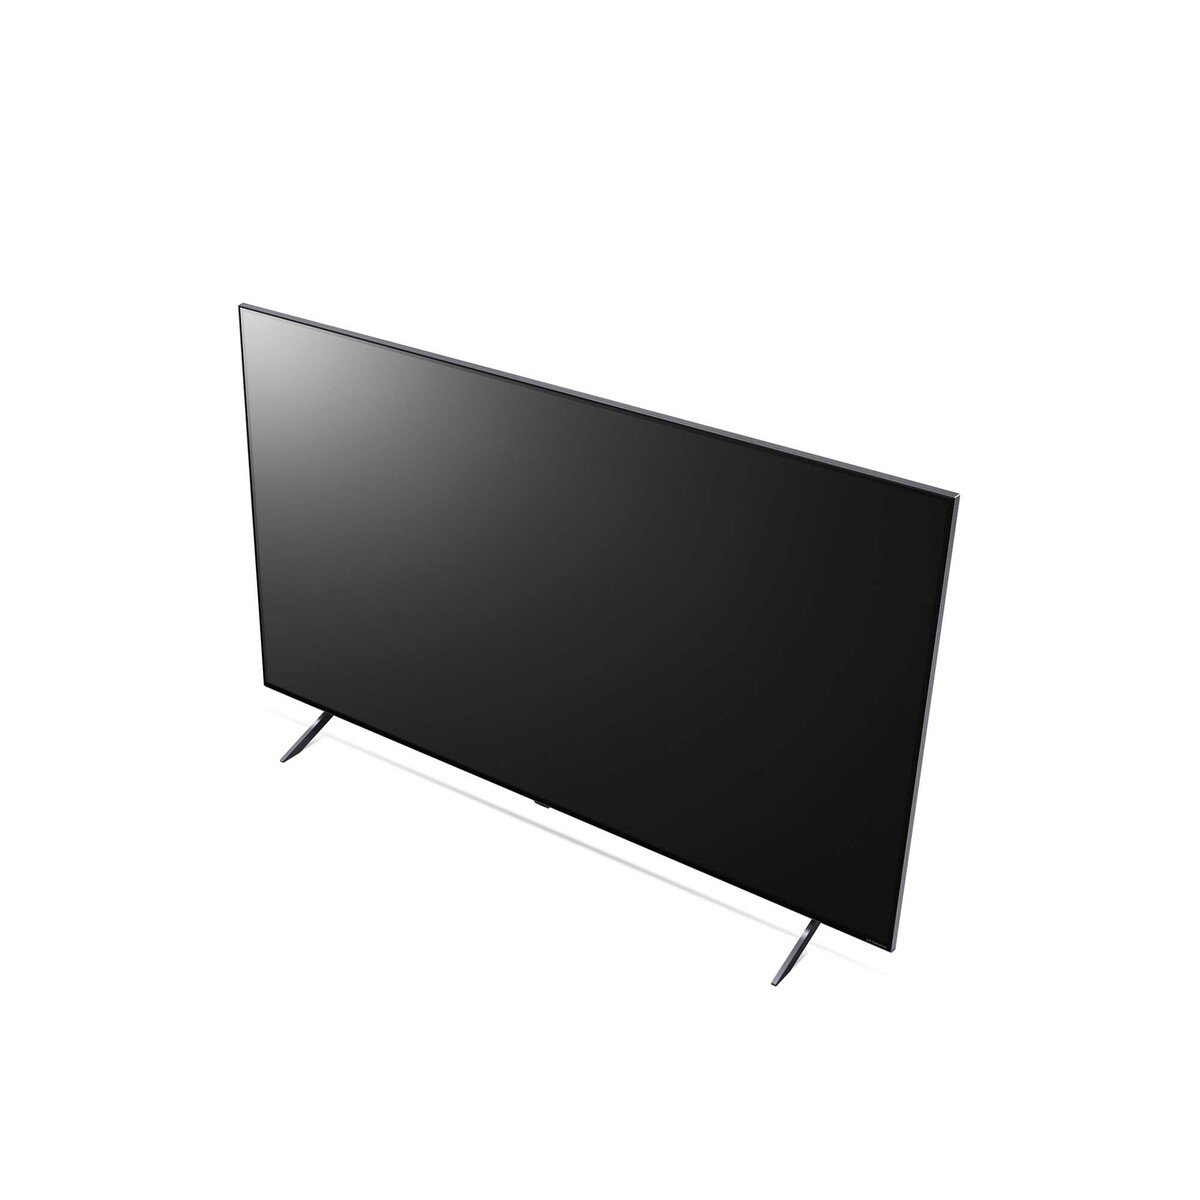 LG NanoCell 4K Smart TV 86 Inch NANO90 Series, ,New 2021 Cinema Screen Design 4K Cinema HDR webOS Smart with ThinQ AI Full Array Dimming Pro